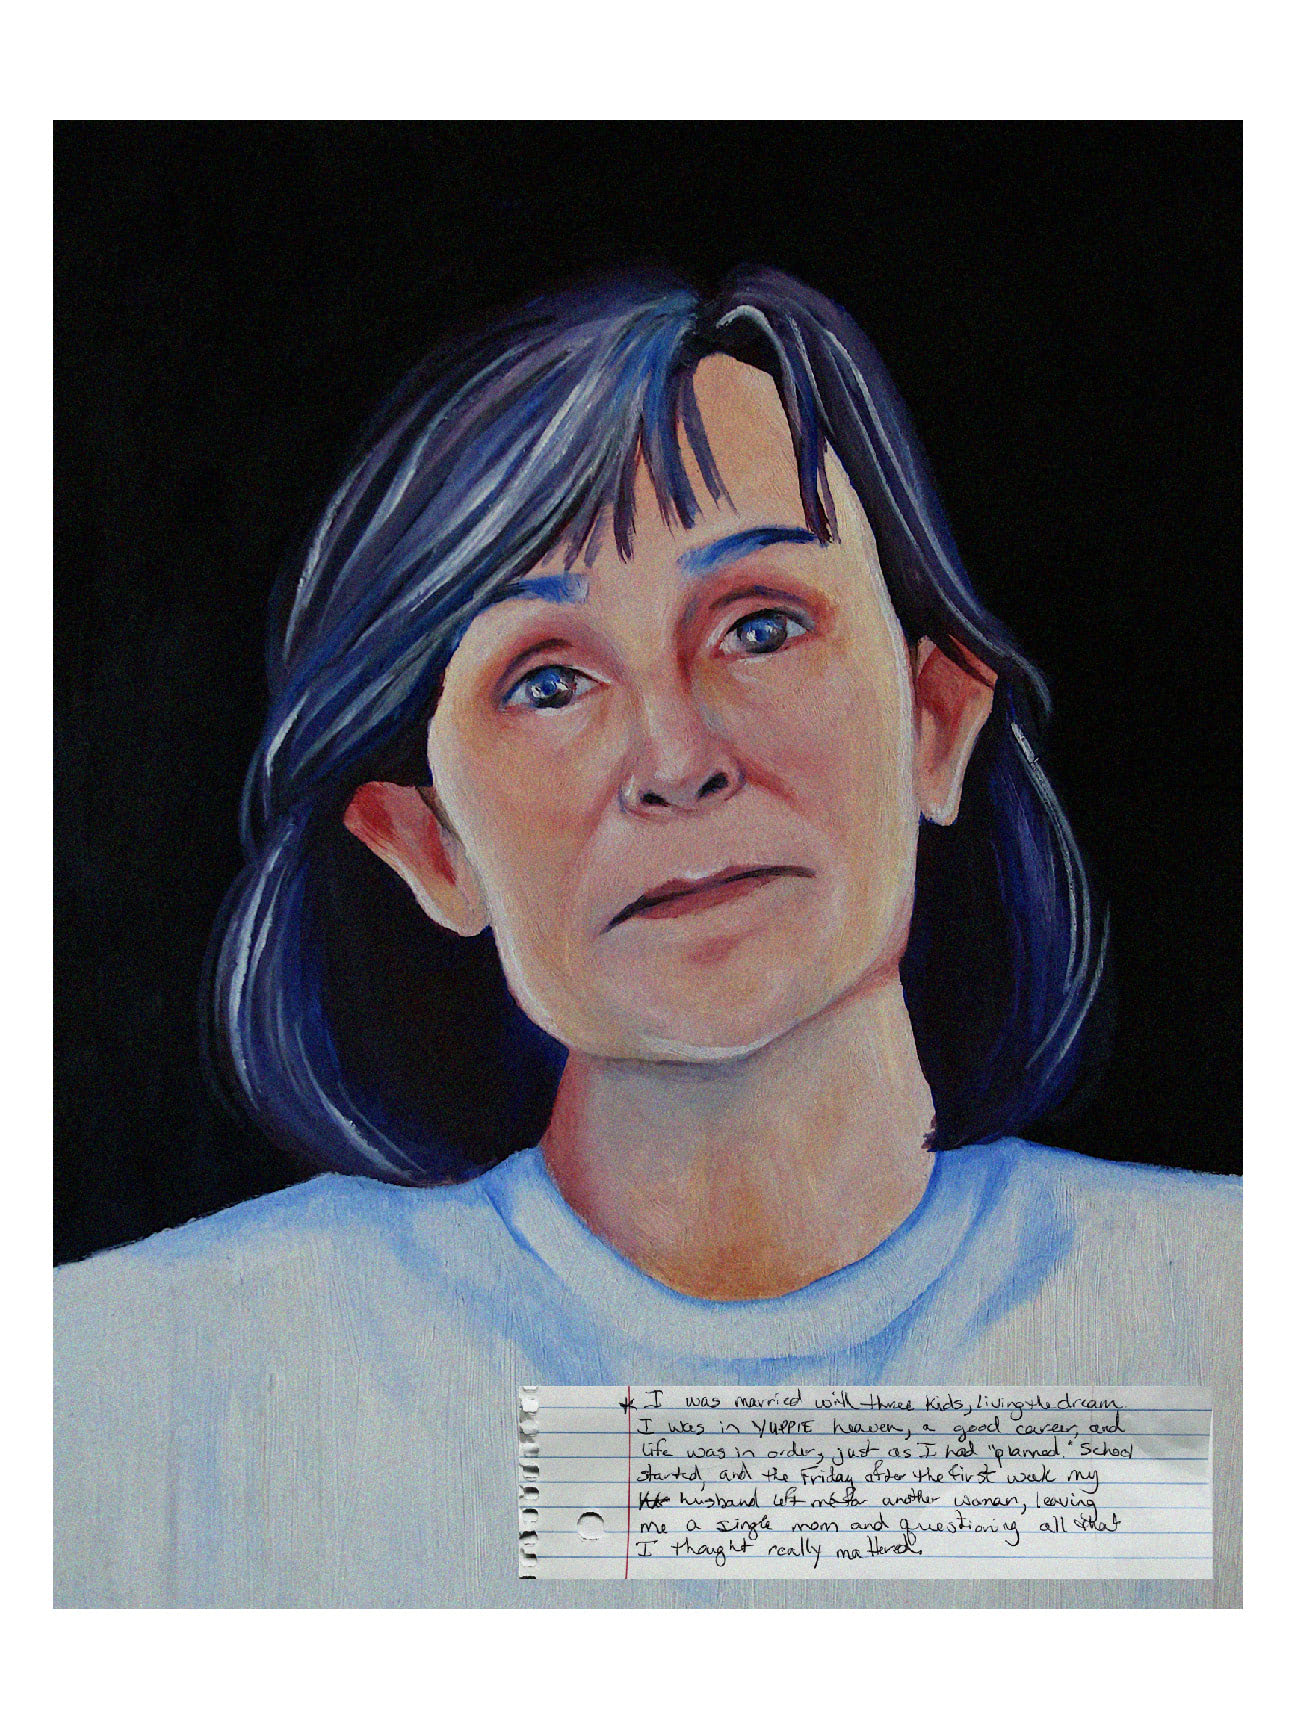 A painting of my mom, a brunette with bangs, looking defeated and resiliently towards the viewer.